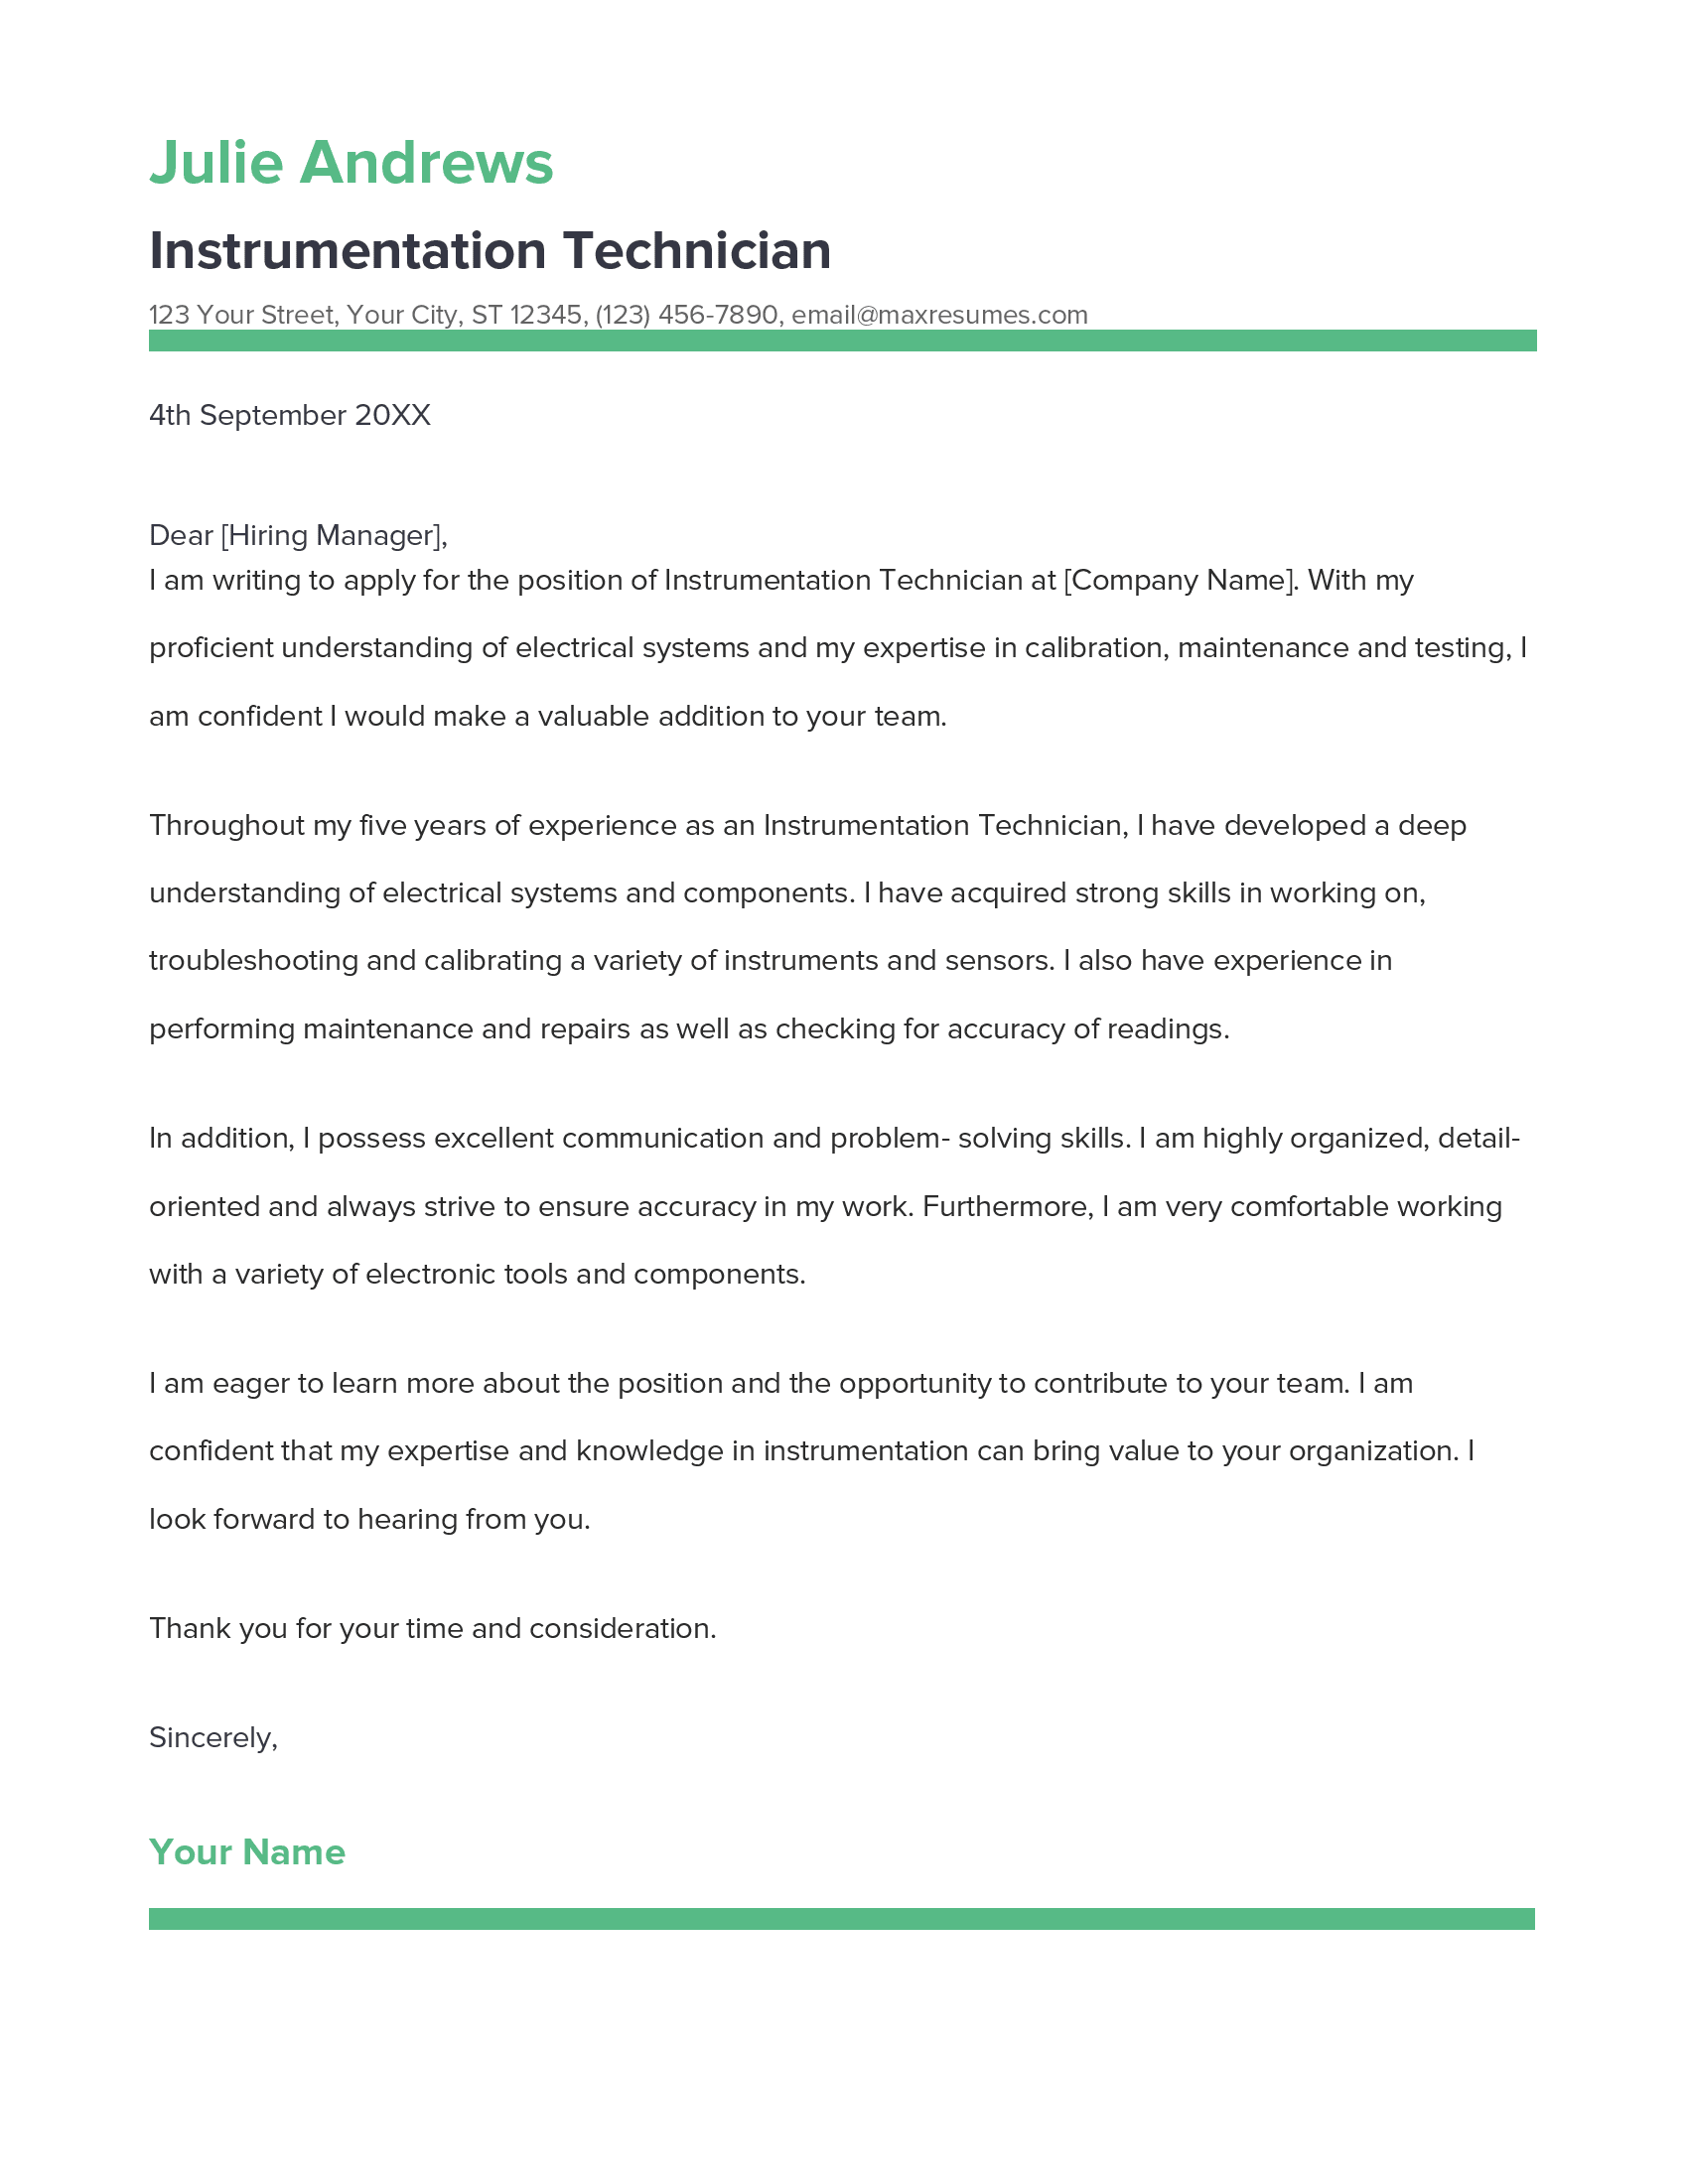 Instrumentation Technician Cover Letter Example